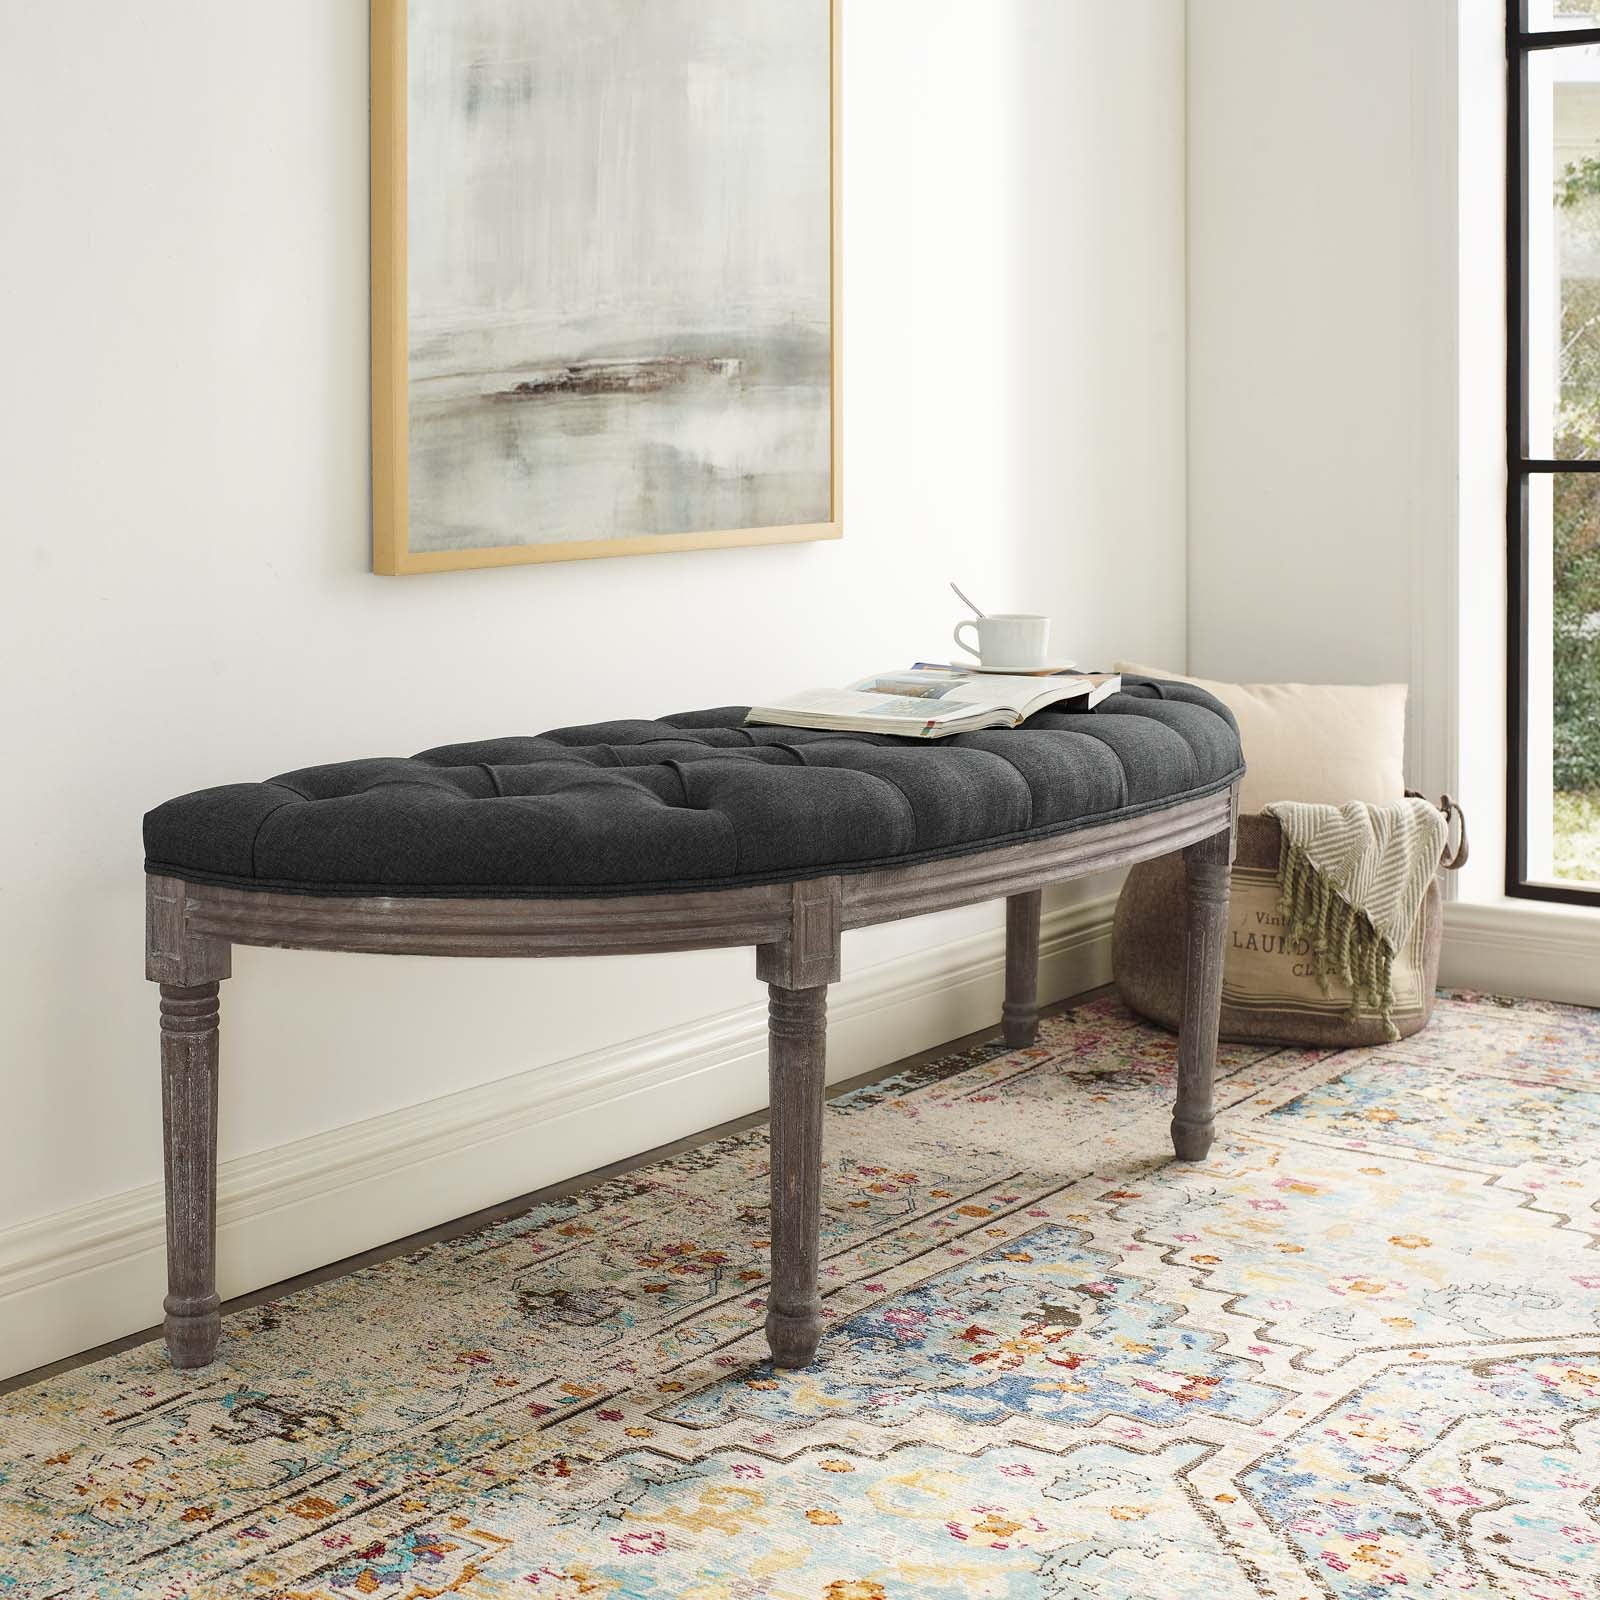 Esteem Vintage French Upholstered Fabric Semi-Circle Bench - East Shore Modern Home Furnishings